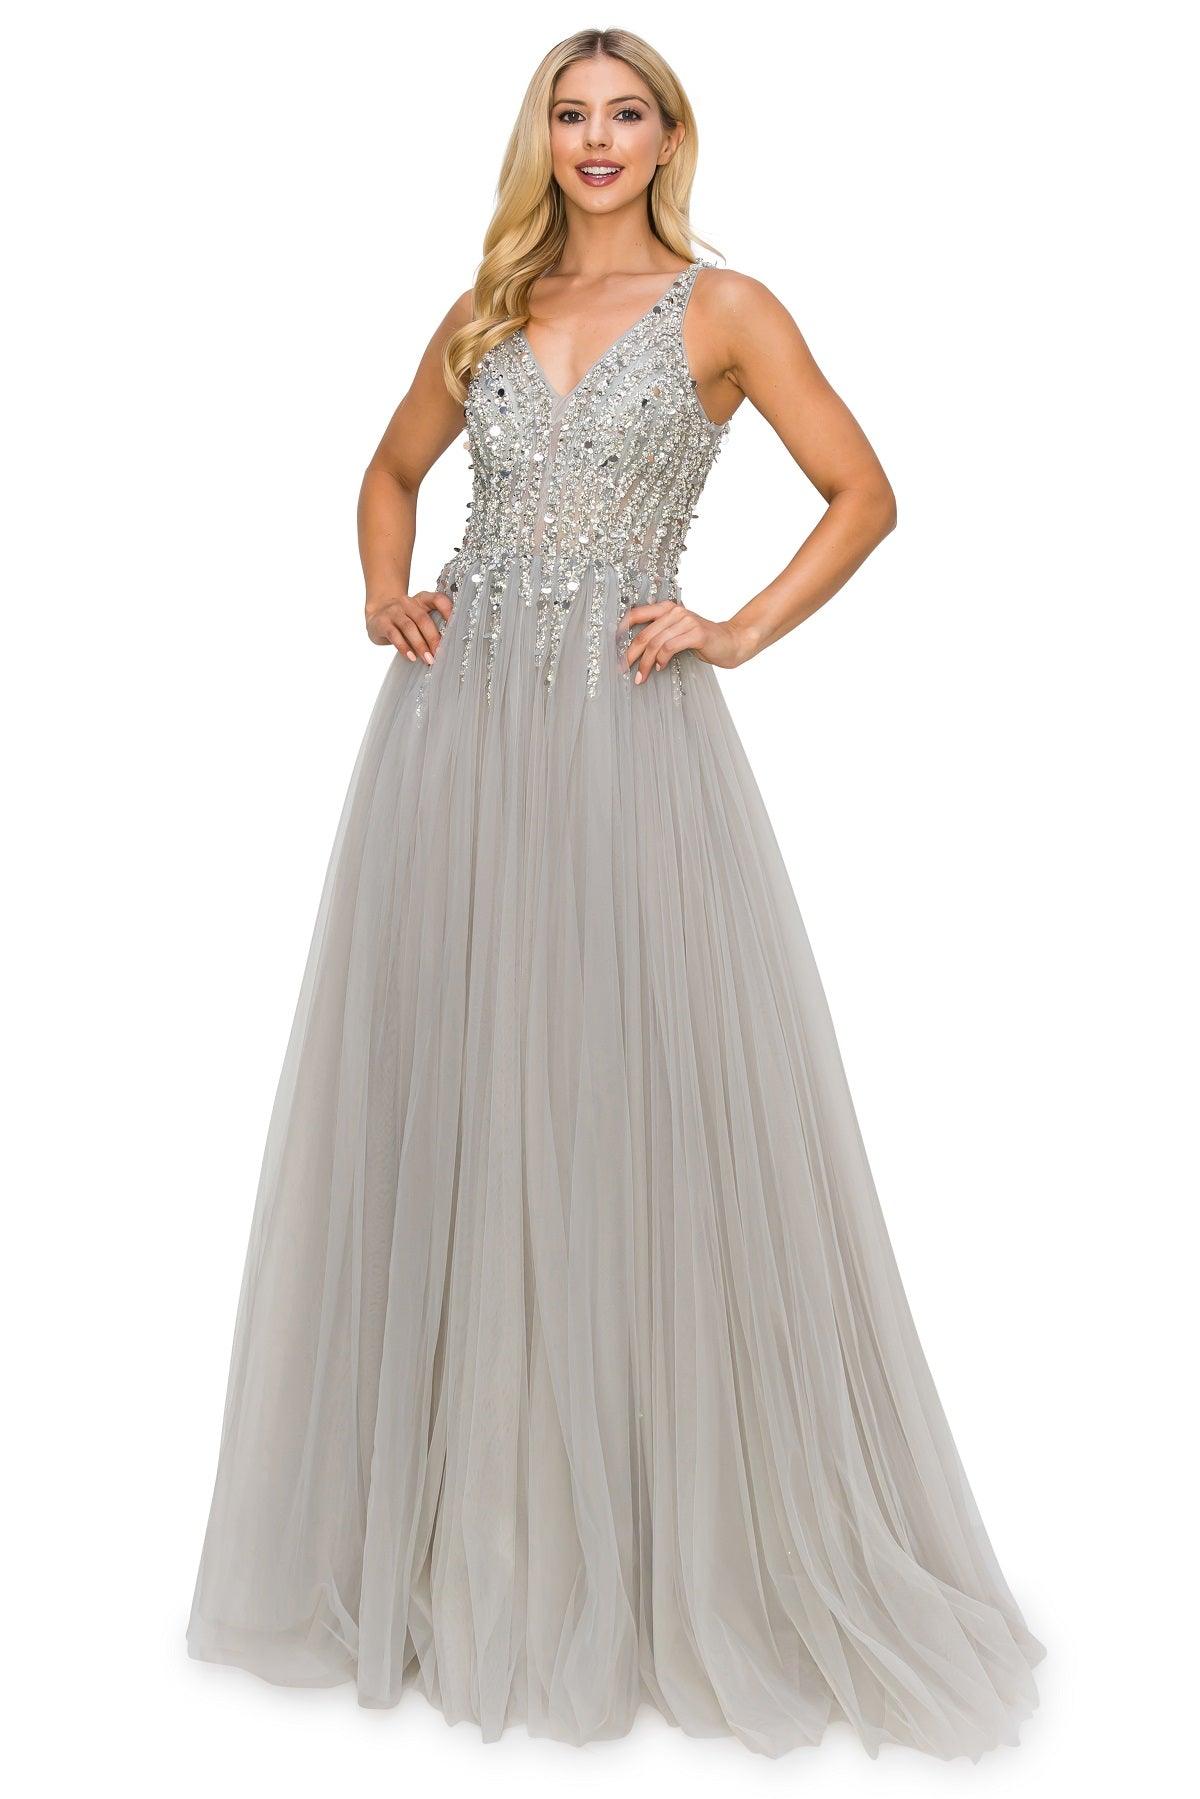 Cinderella Couture CC8034J Sleeveless Beaded Tulle Gown Silver